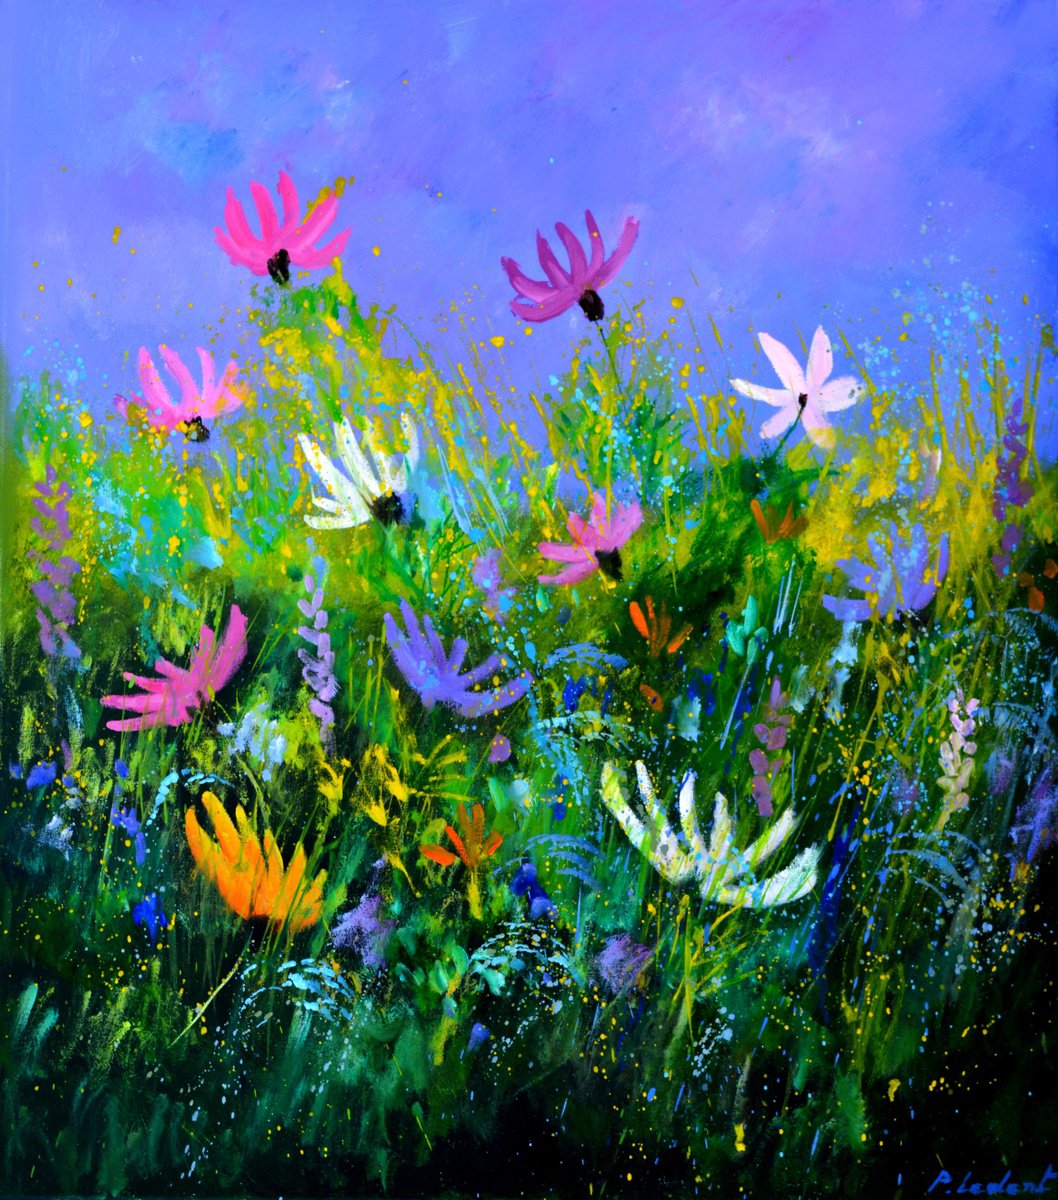 A few cosmos flowers - 7823 by Pol Henry Ledent